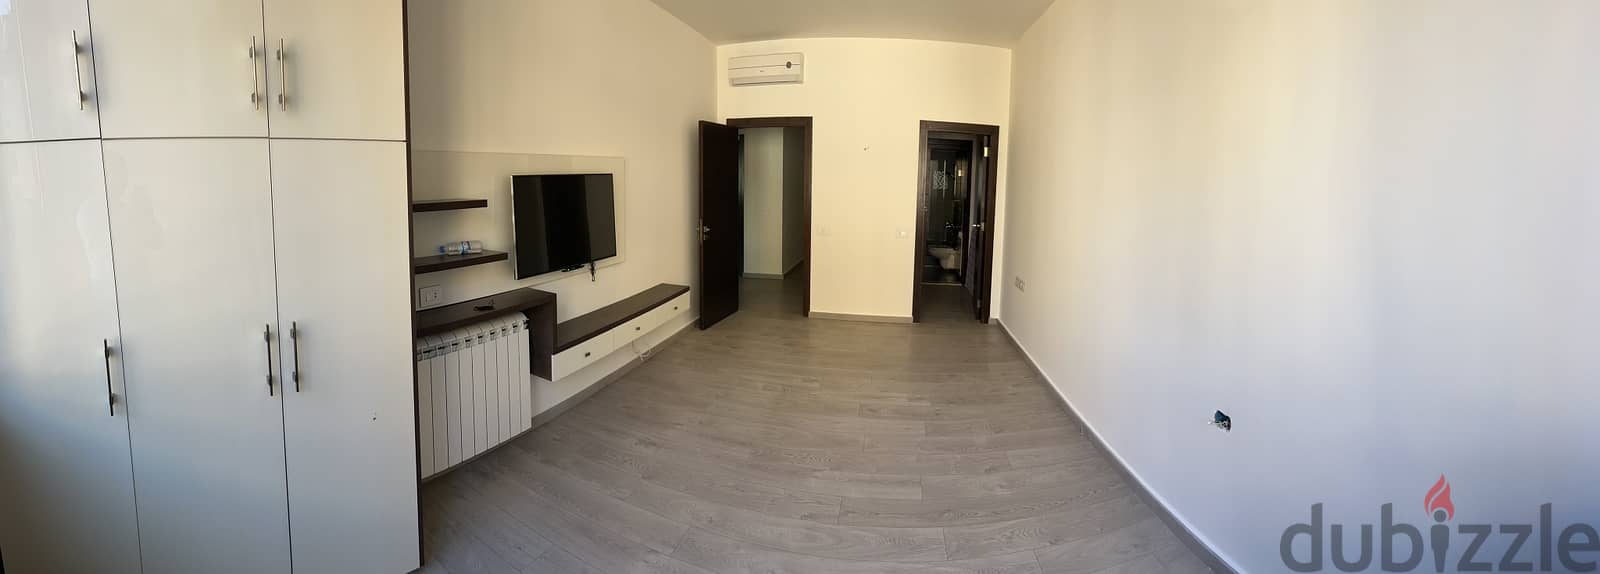 Mansourieh Prime (190Sq) 3 BEDROOMS , (MA-285) 1